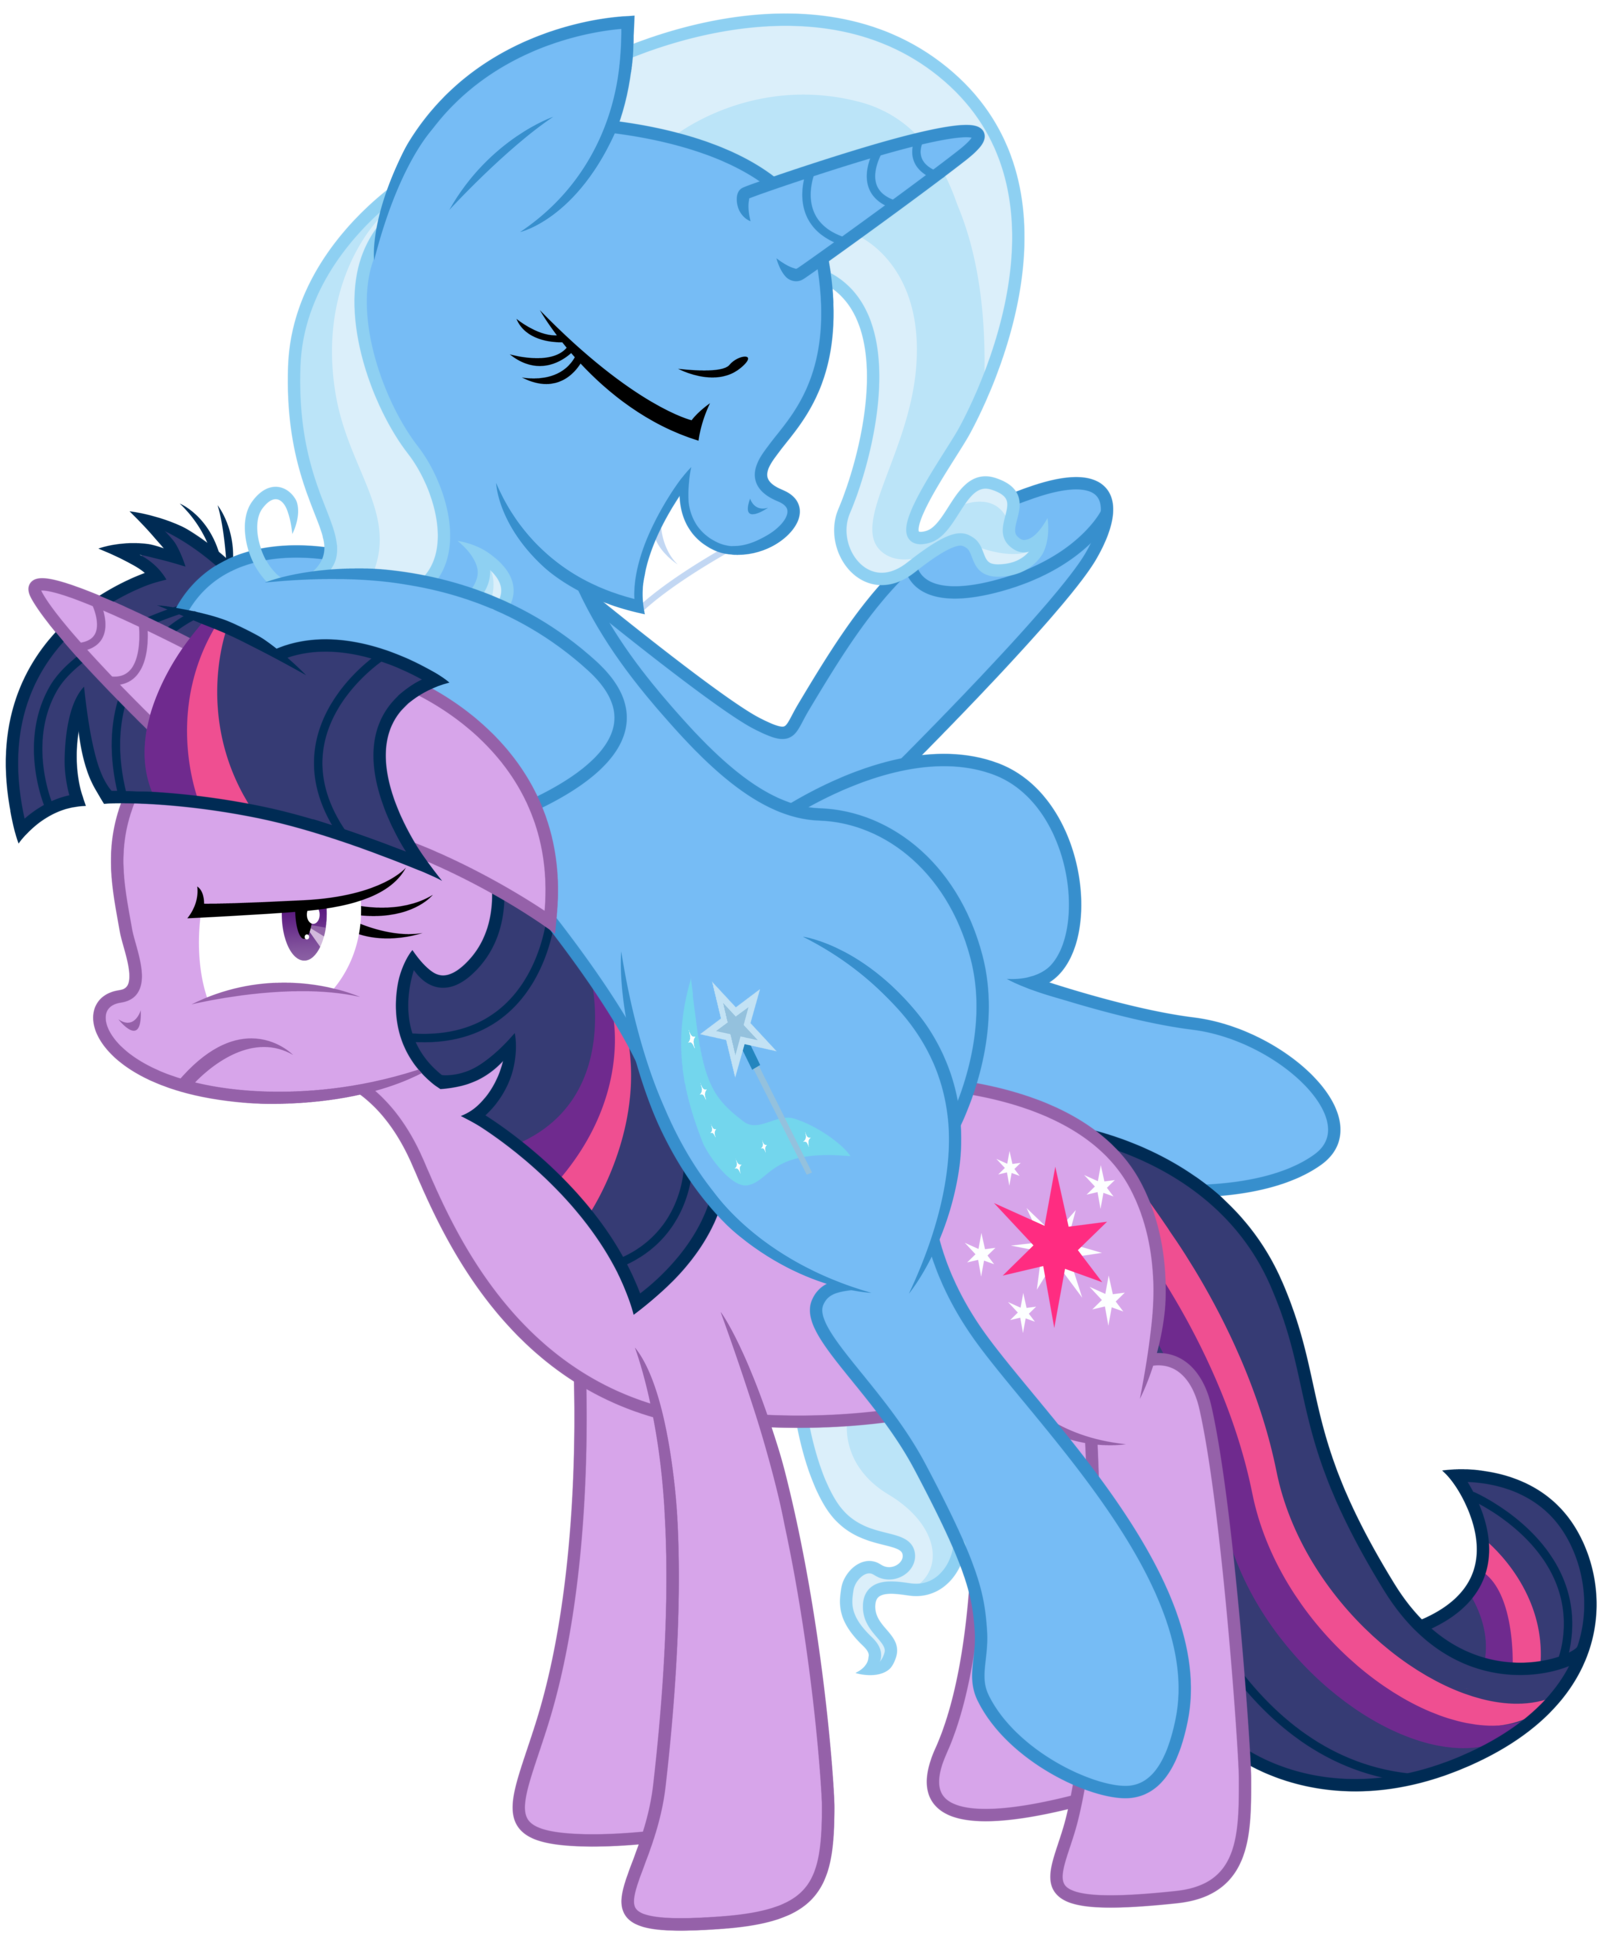 trixie___you_could_be_comfier_by_kooner0